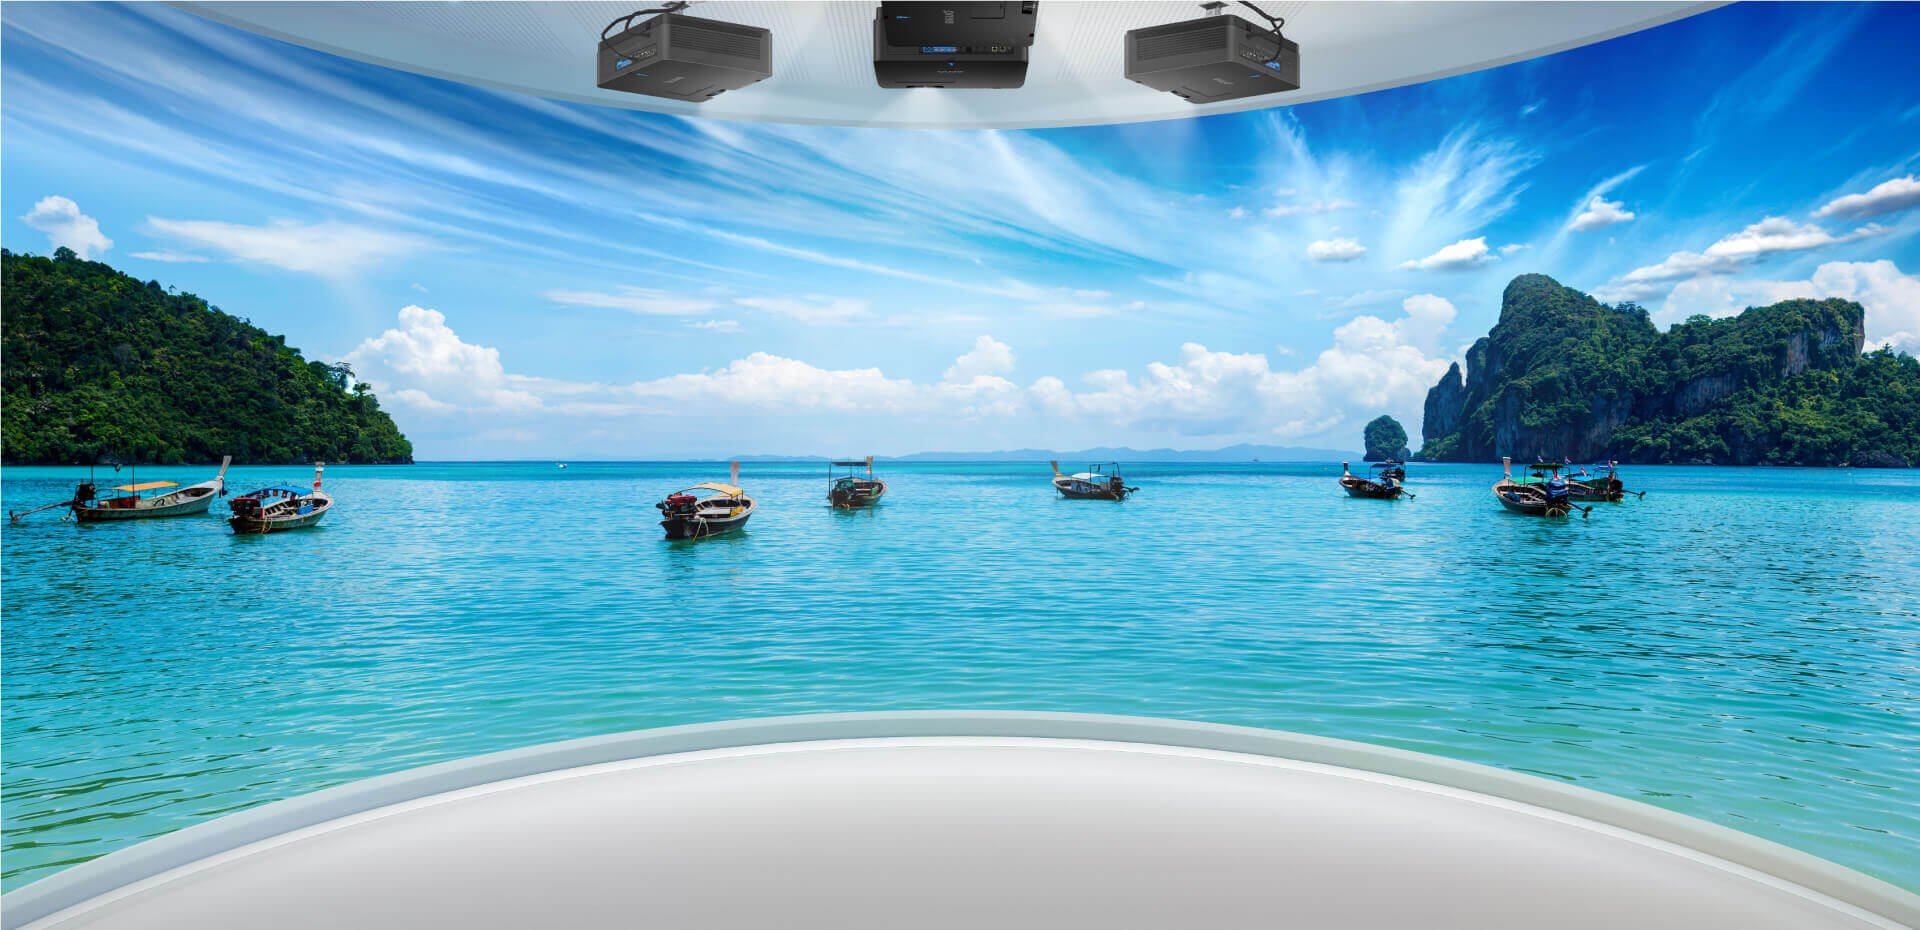 BenQ LU9800 Large Venue Projector with exclusive white balance adjustments can reduce white balance variables between images projected from different projectors